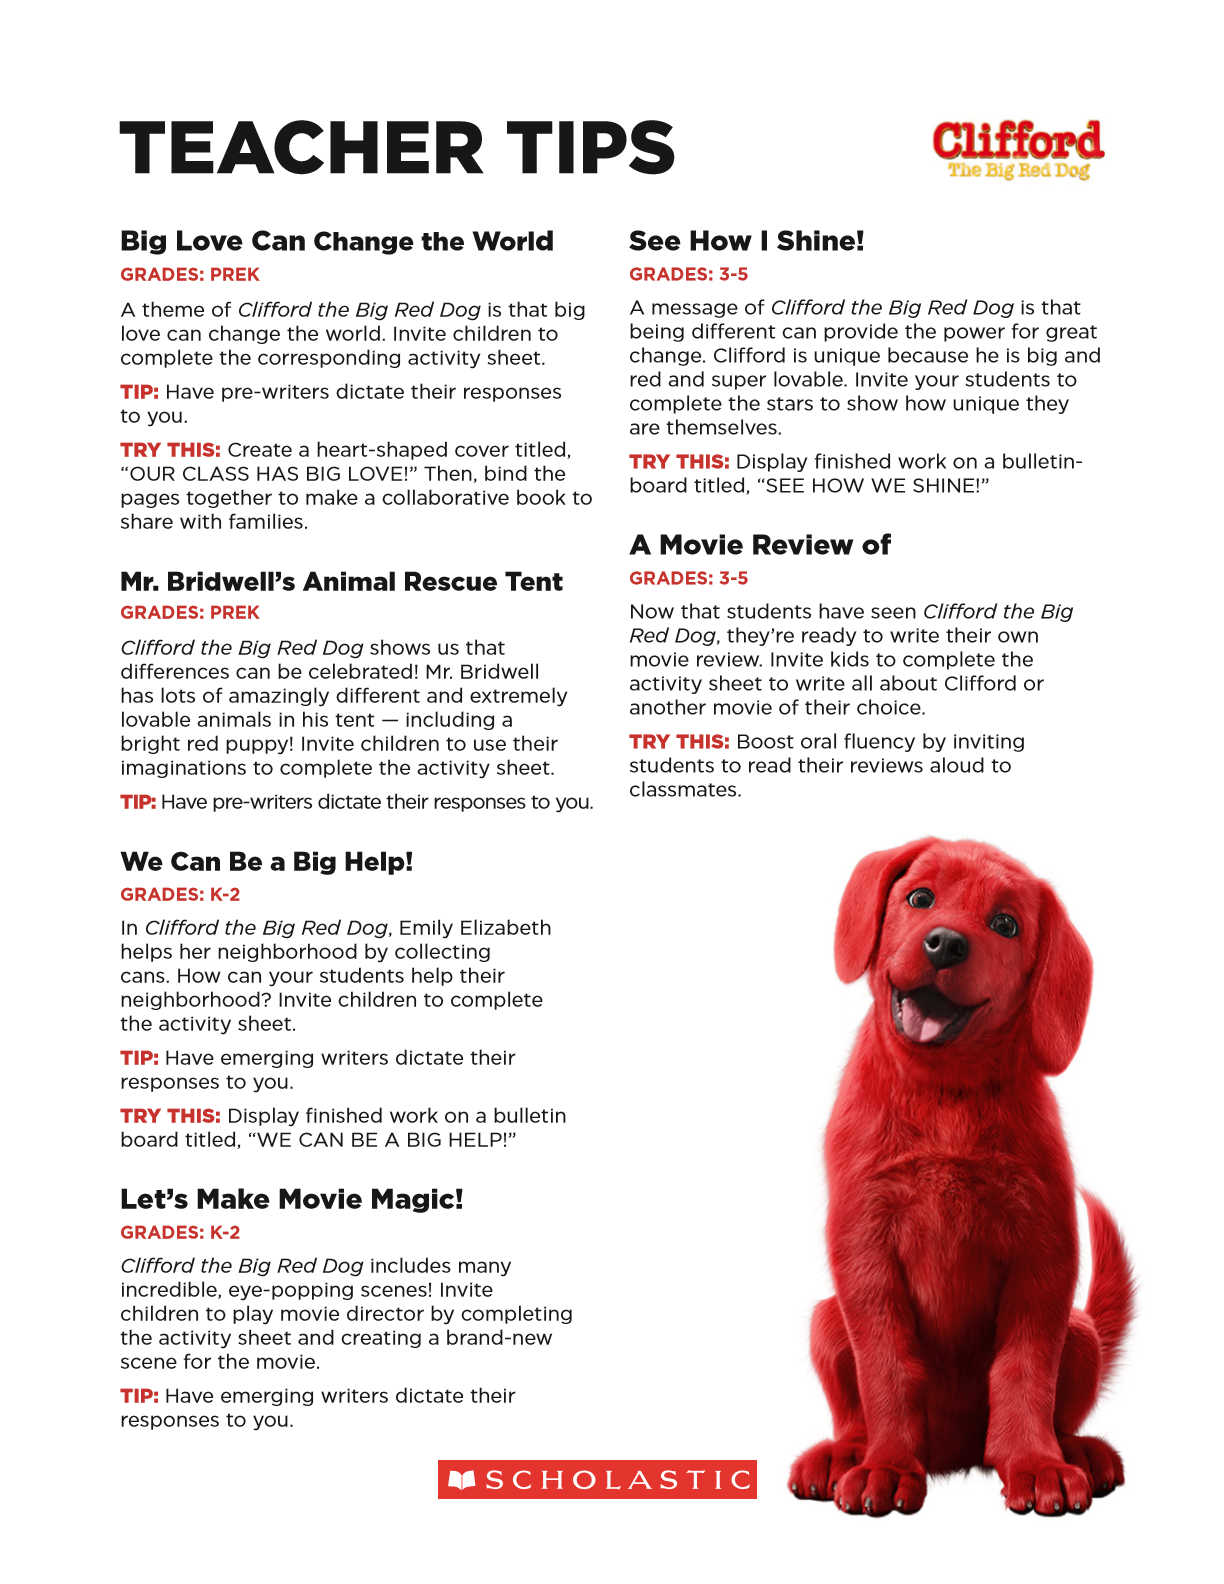 Download the free printable Clifford activities packet from the new Clifford The Big Red Dog movie, so your kids can have a whole lot of fun.